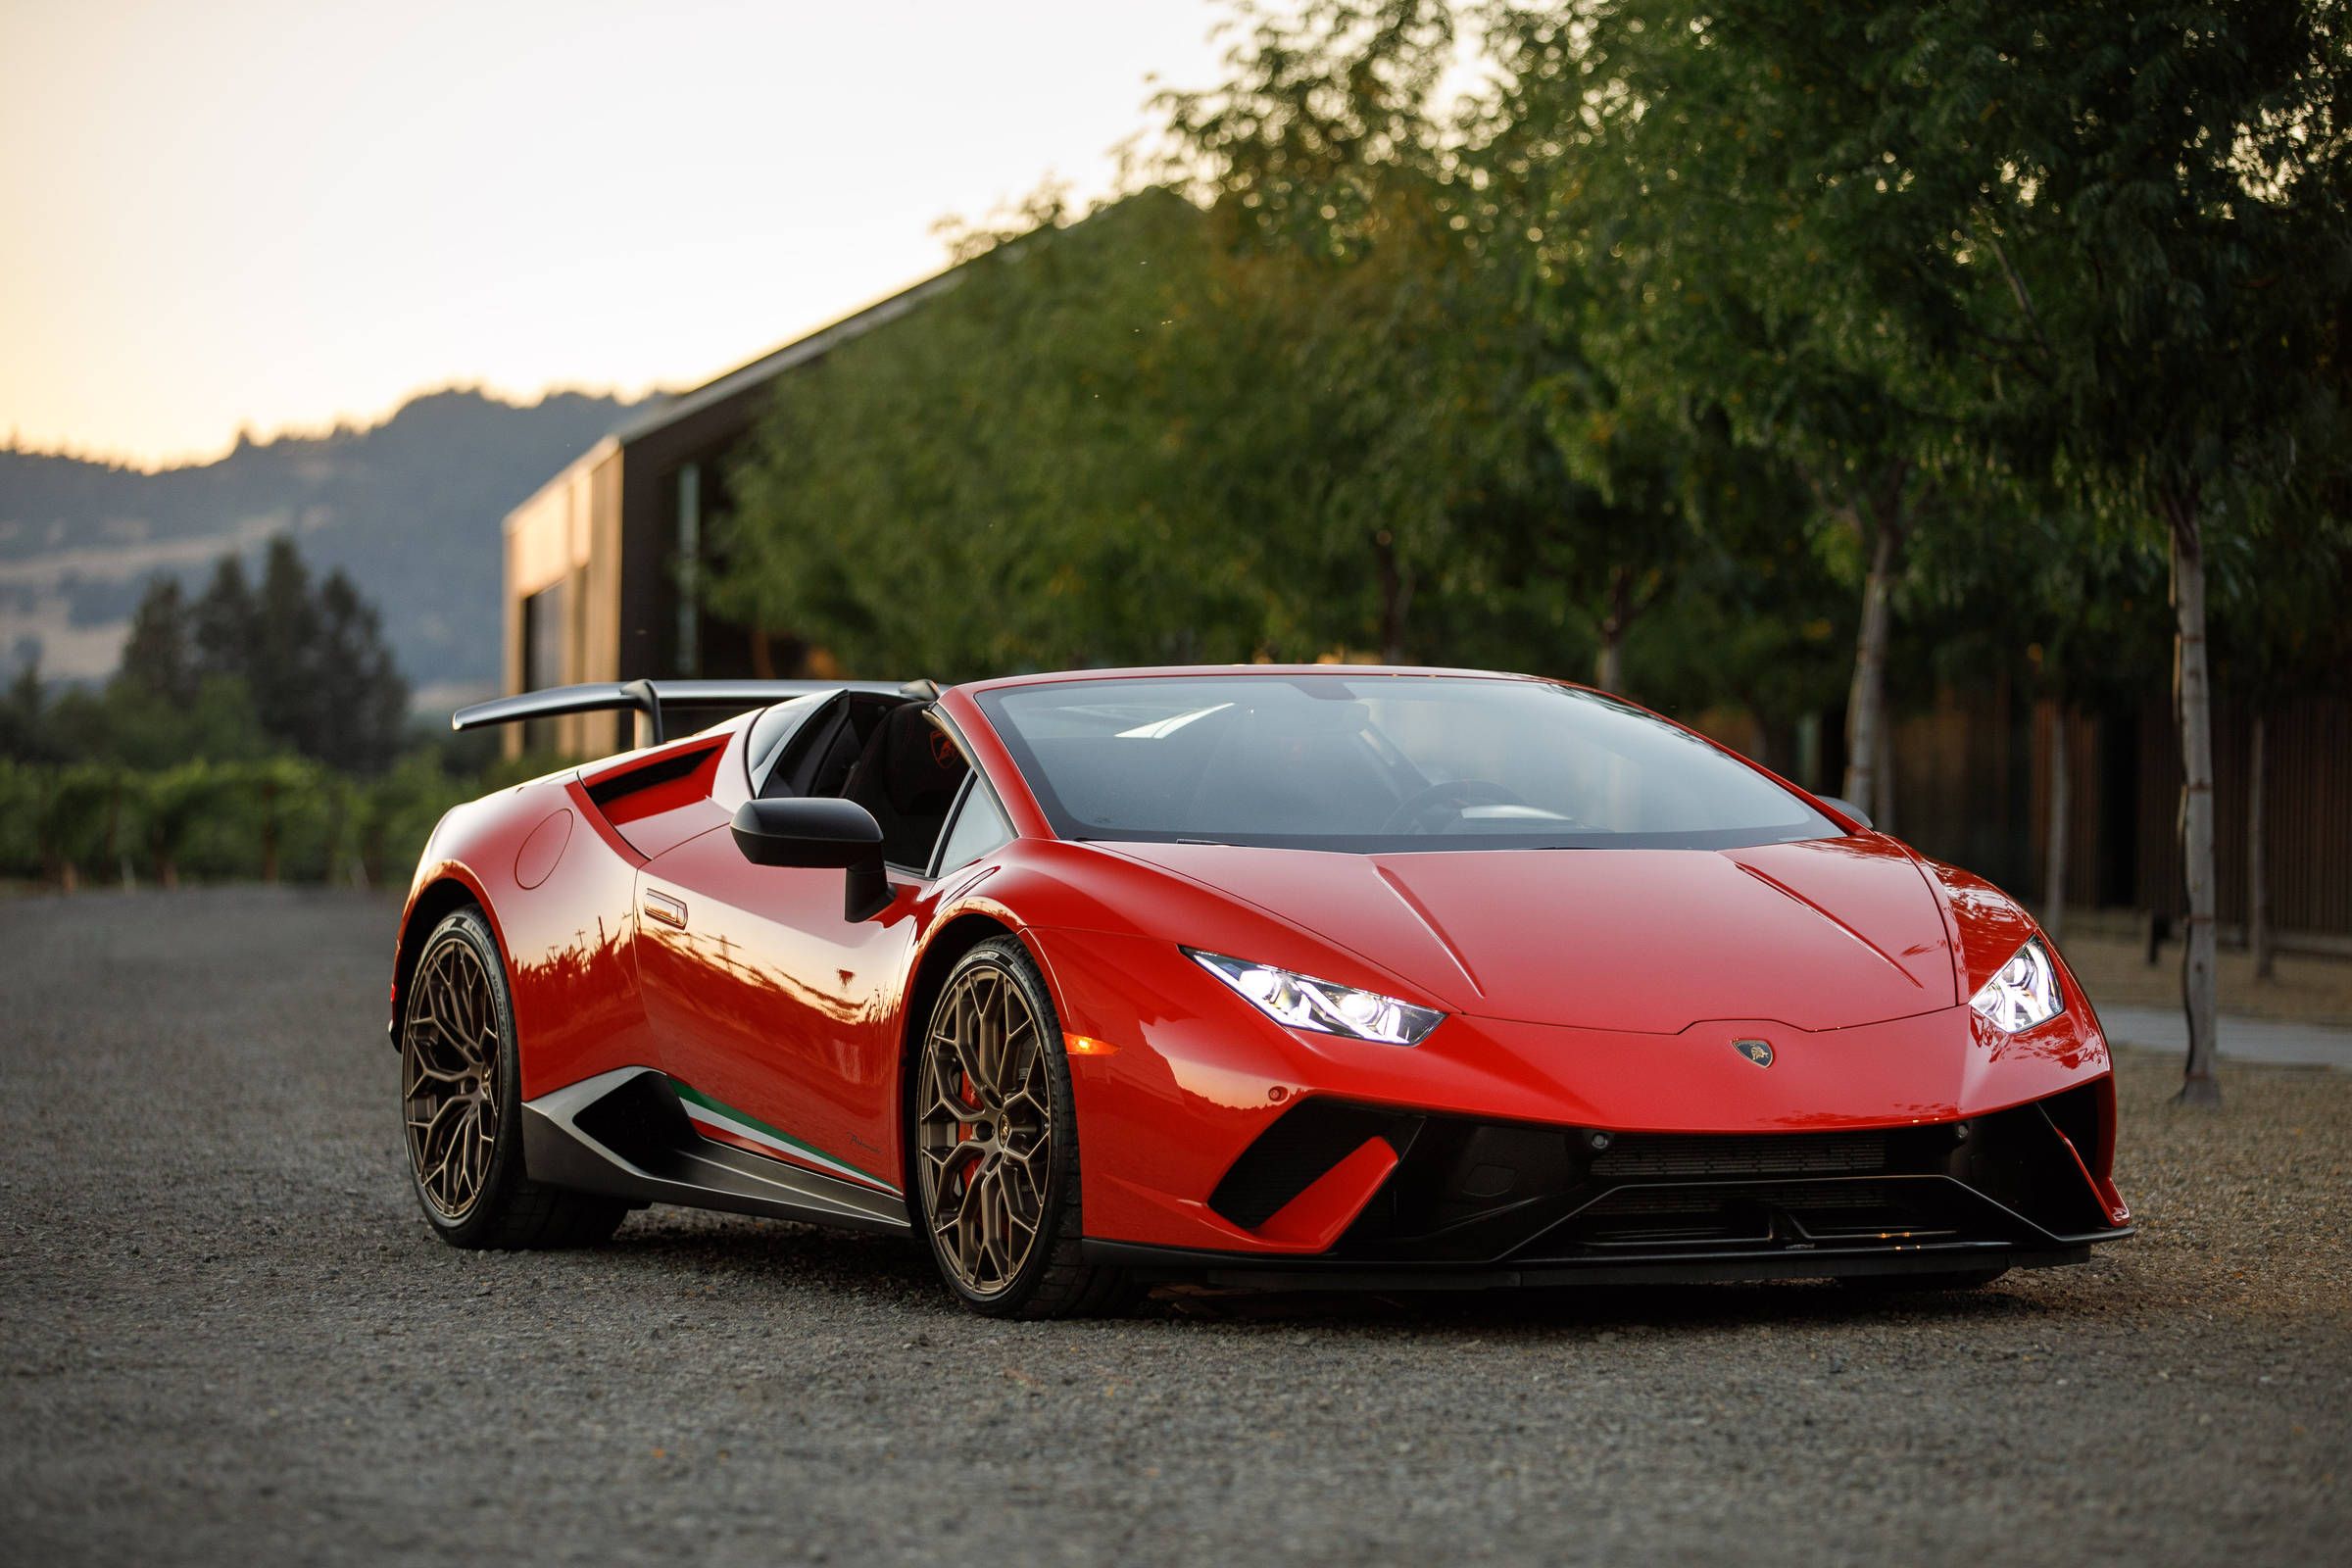 2018 Huracan Performante Spyder drive: King of curves